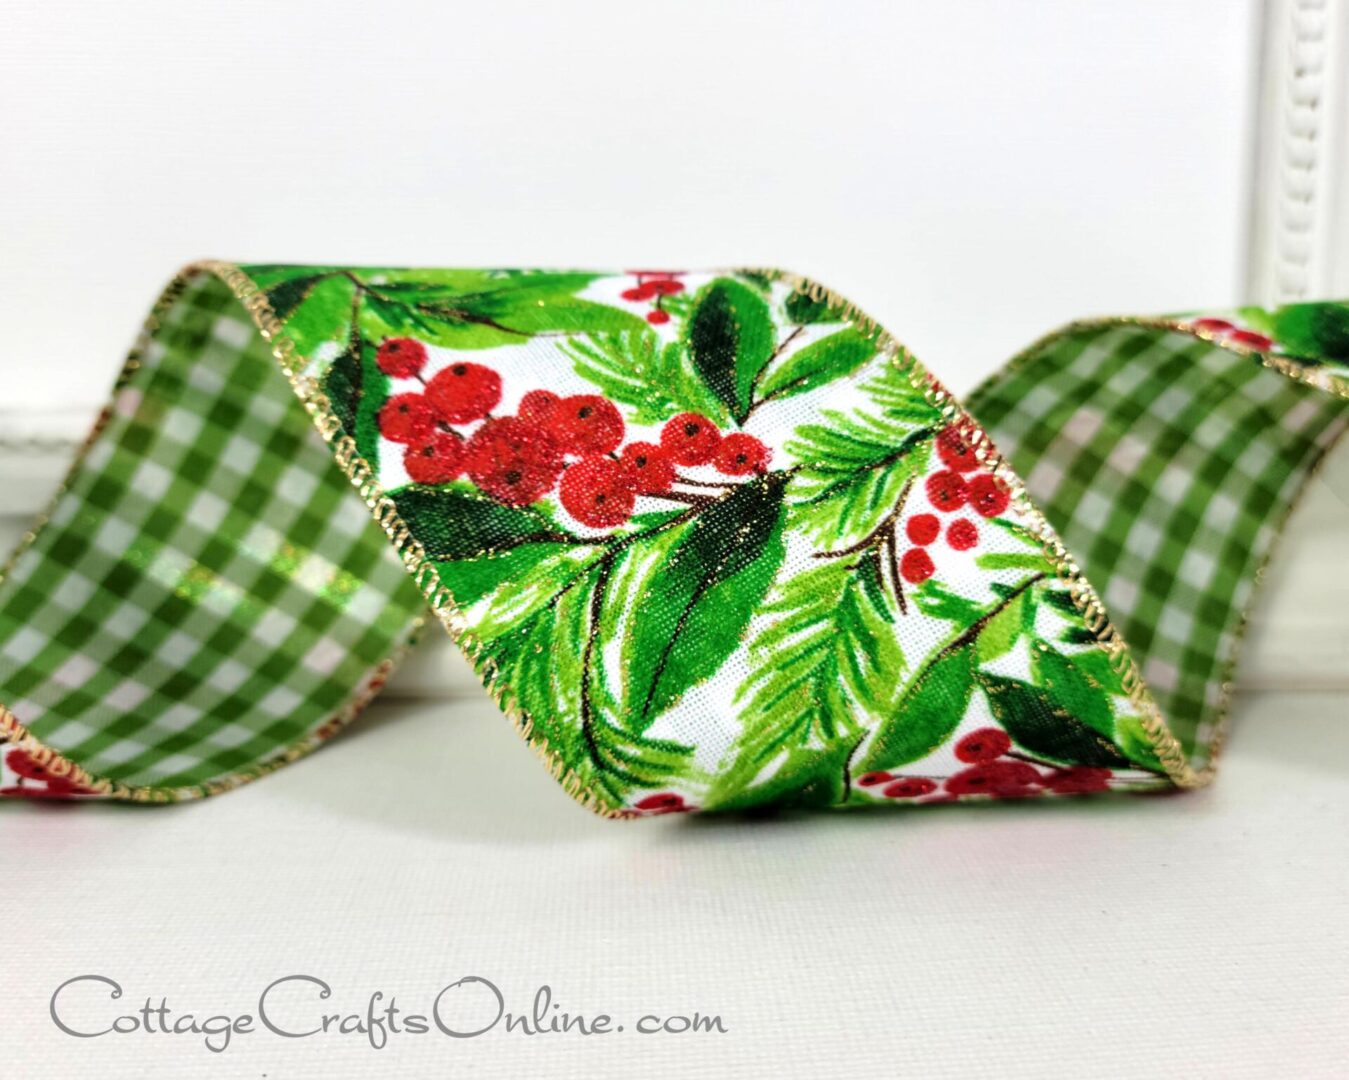 Green holiday foliage and red berries with green and white plaid back 2.5" wide wired ribbon from the Etsy shop of Cottage Crafts Online.